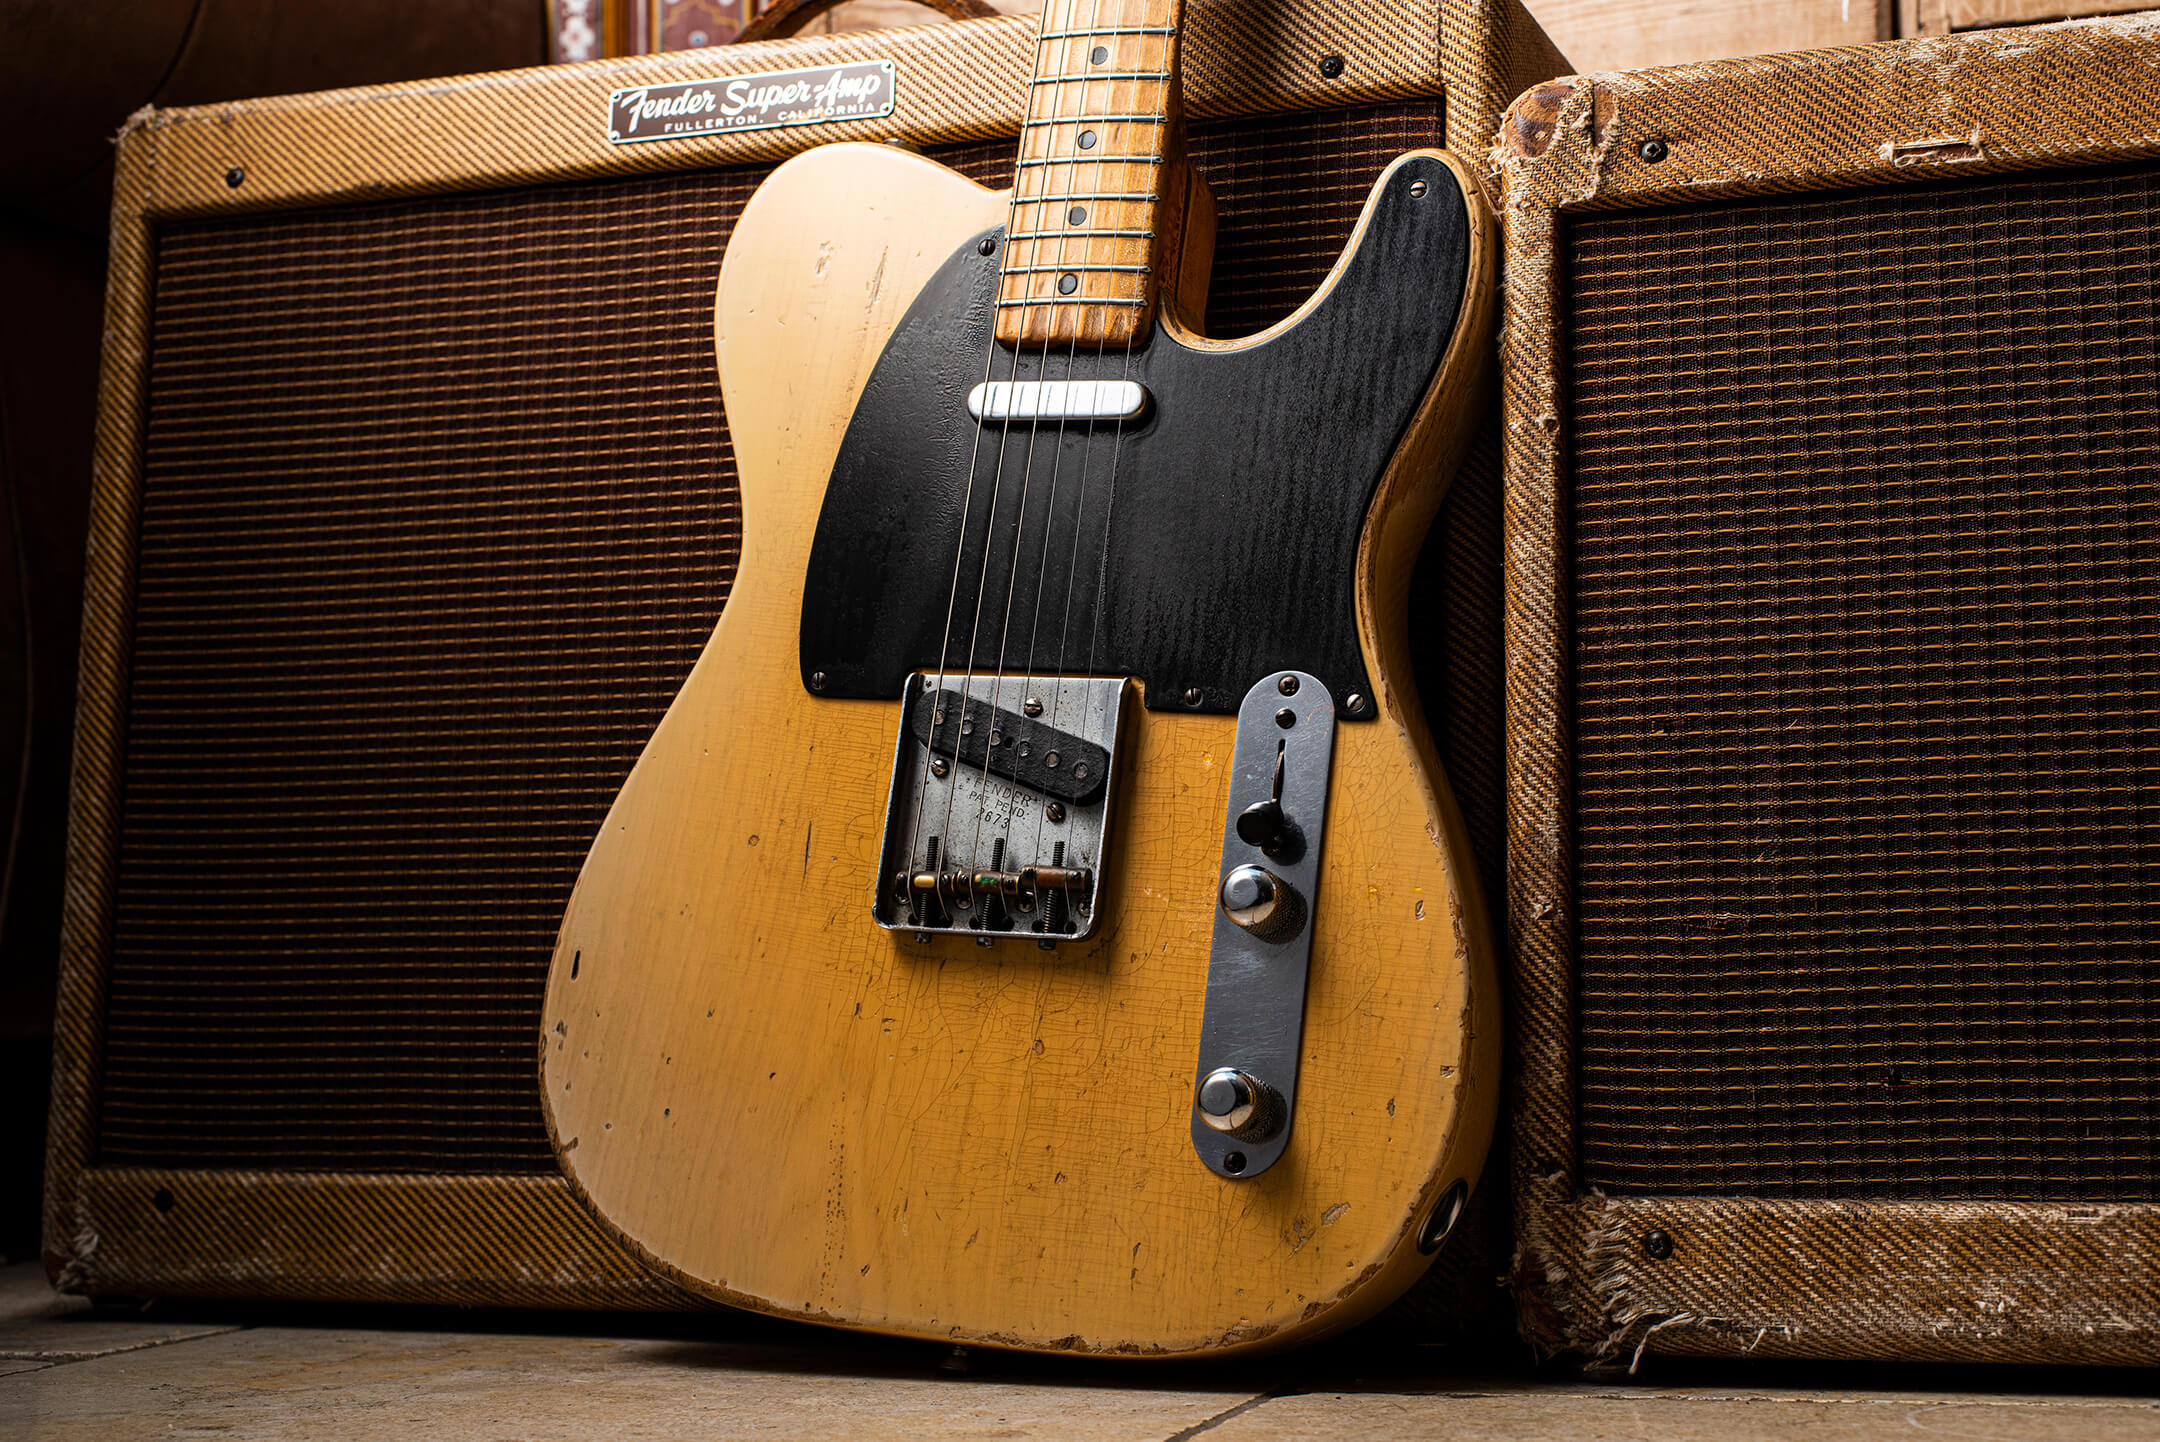 How to buy a vintage Telecaster